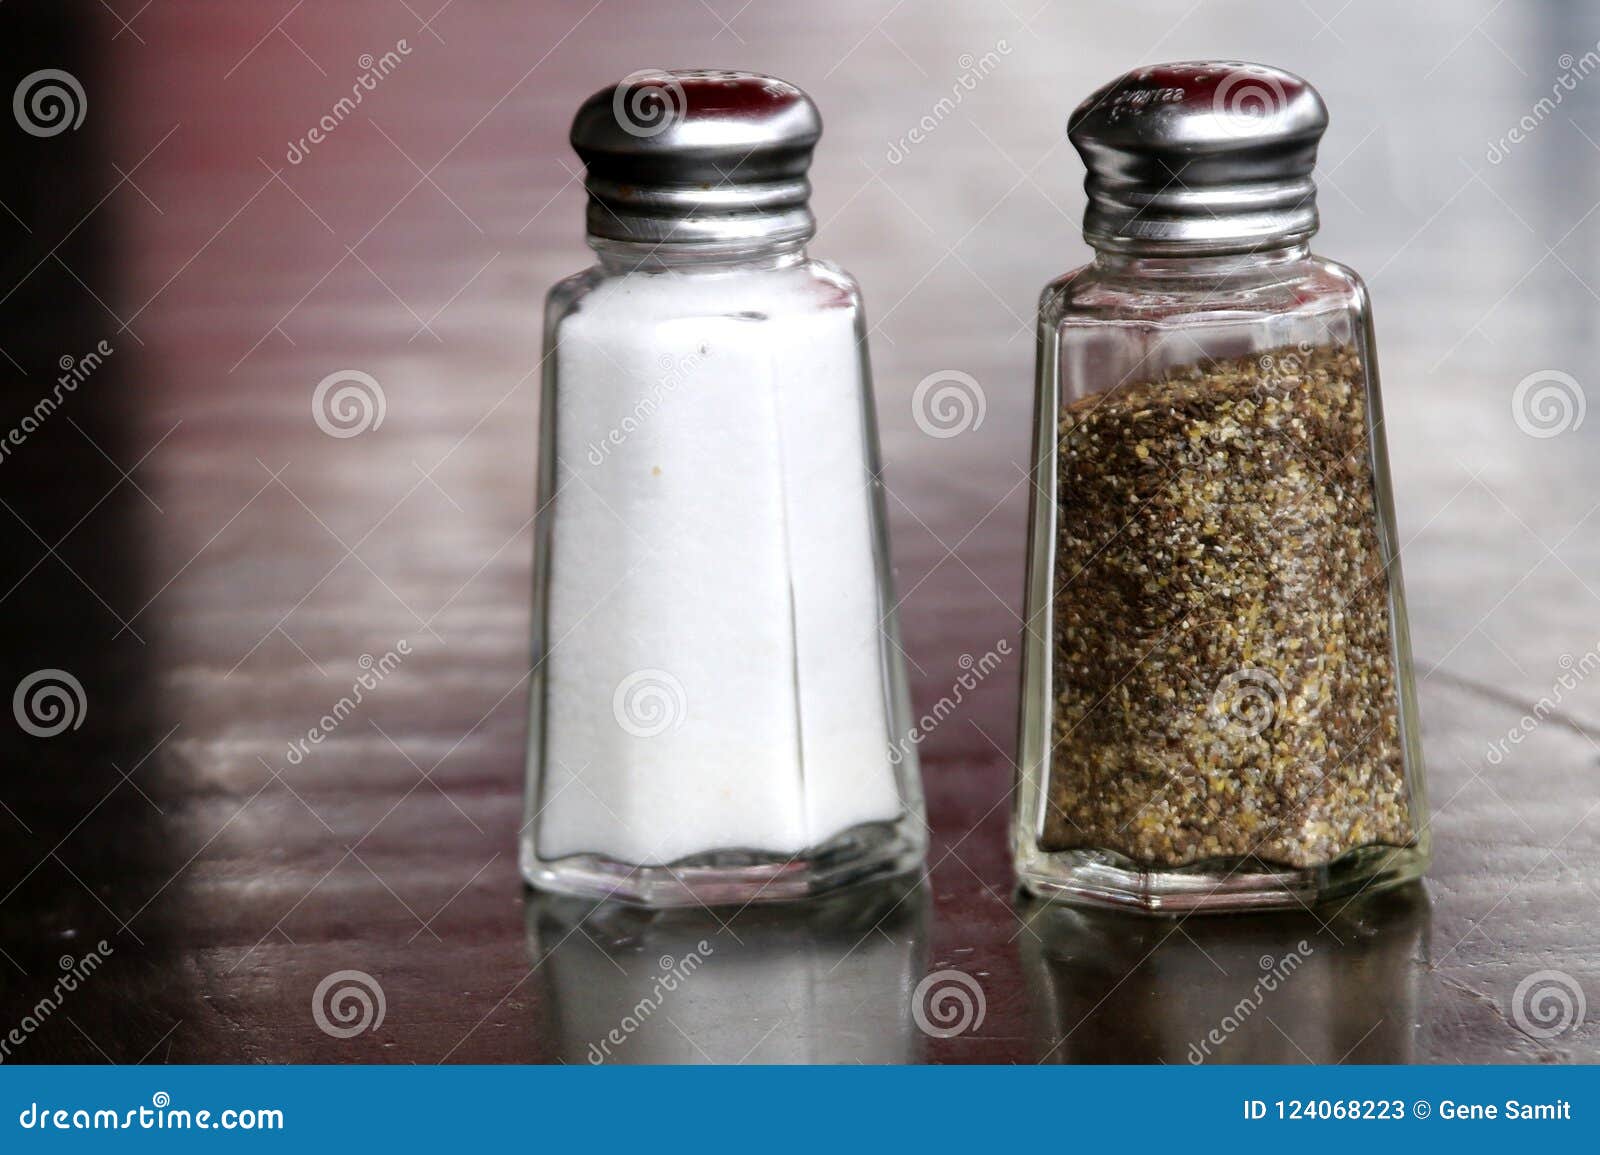 Salt And Pepper Shakers Go Together. Stock Image Image